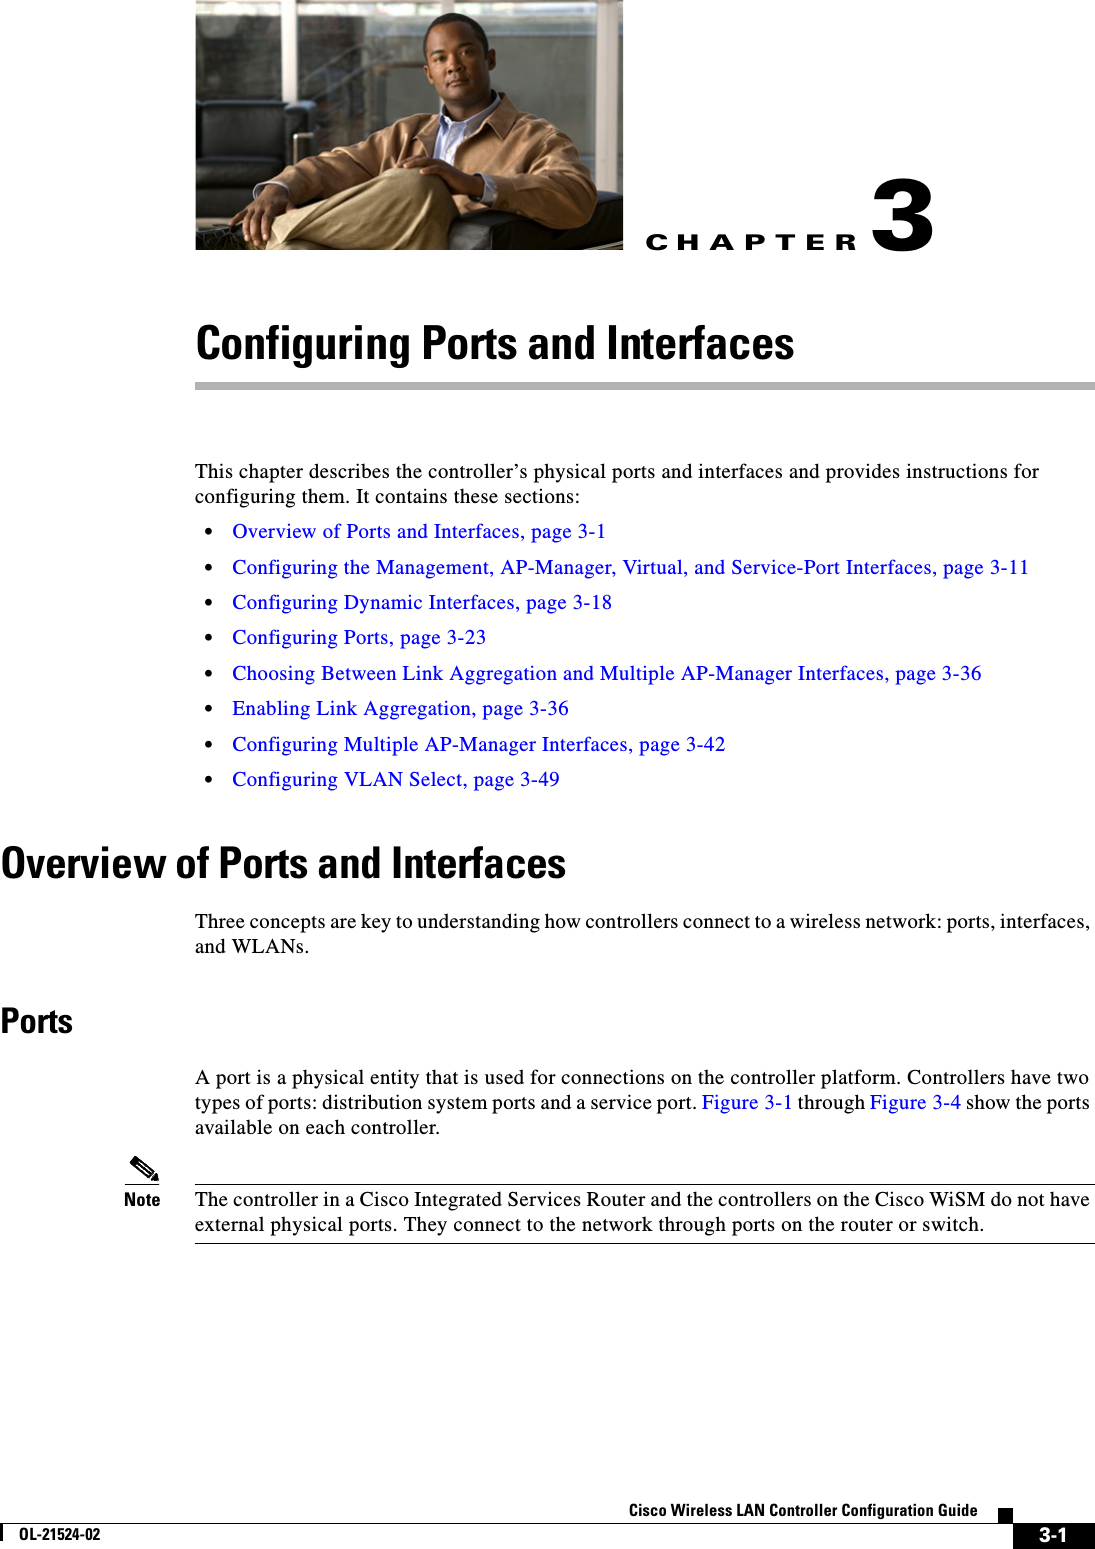 CHAPTER3-1Cisco Wireless LAN Controller Configuration GuideOL-21524-023Configuring Ports and InterfacesThis chapter describes the controller’s physical ports and interfaces and provides instructions for configuring them. It contains these sections:  • Overview of Ports and Interfaces, page 3-1  • Configuring the Management, AP-Manager, Virtual, and Service-Port Interfaces, page 3-11  • Configuring Dynamic Interfaces, page 3-18  • Configuring Ports, page 3-23  • Choosing Between Link Aggregation and Multiple AP-Manager Interfaces, page 3-36  • Enabling Link Aggregation, page 3-36  • Configuring Multiple AP-Manager Interfaces, page 3-42  • Configuring VLAN Select, page 3-49Overview of Ports and InterfacesThree concepts are key to understanding how controllers connect to a wireless network: ports, interfaces, and WLANs.PortsA port is a physical entity that is used for connections on the controller platform. Controllers have two types of ports: distribution system ports and a service port. Figure 3-1 through Figure 3-4 show the ports available on each controller.Note The controller in a Cisco Integrated Services Router and the controllers on the Cisco WiSM do not have external physical ports. They connect to the network through ports on the router or switch.